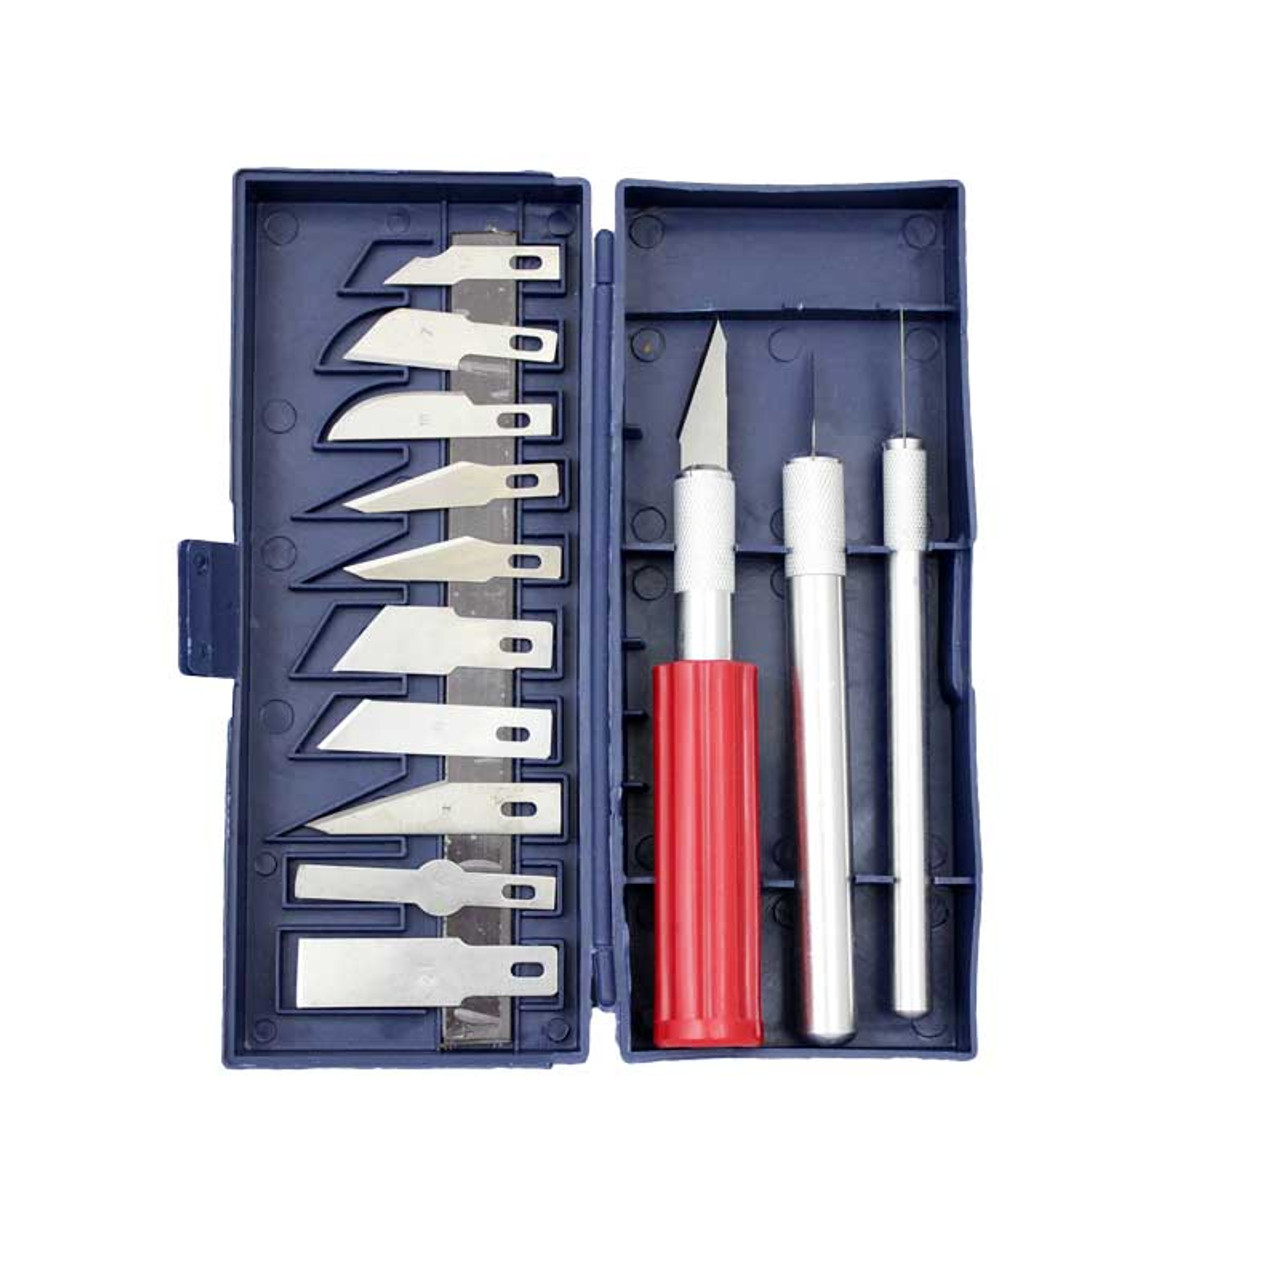 X-ACTO Precision Knife Set - Handle #1 with 5 Assorted Blades